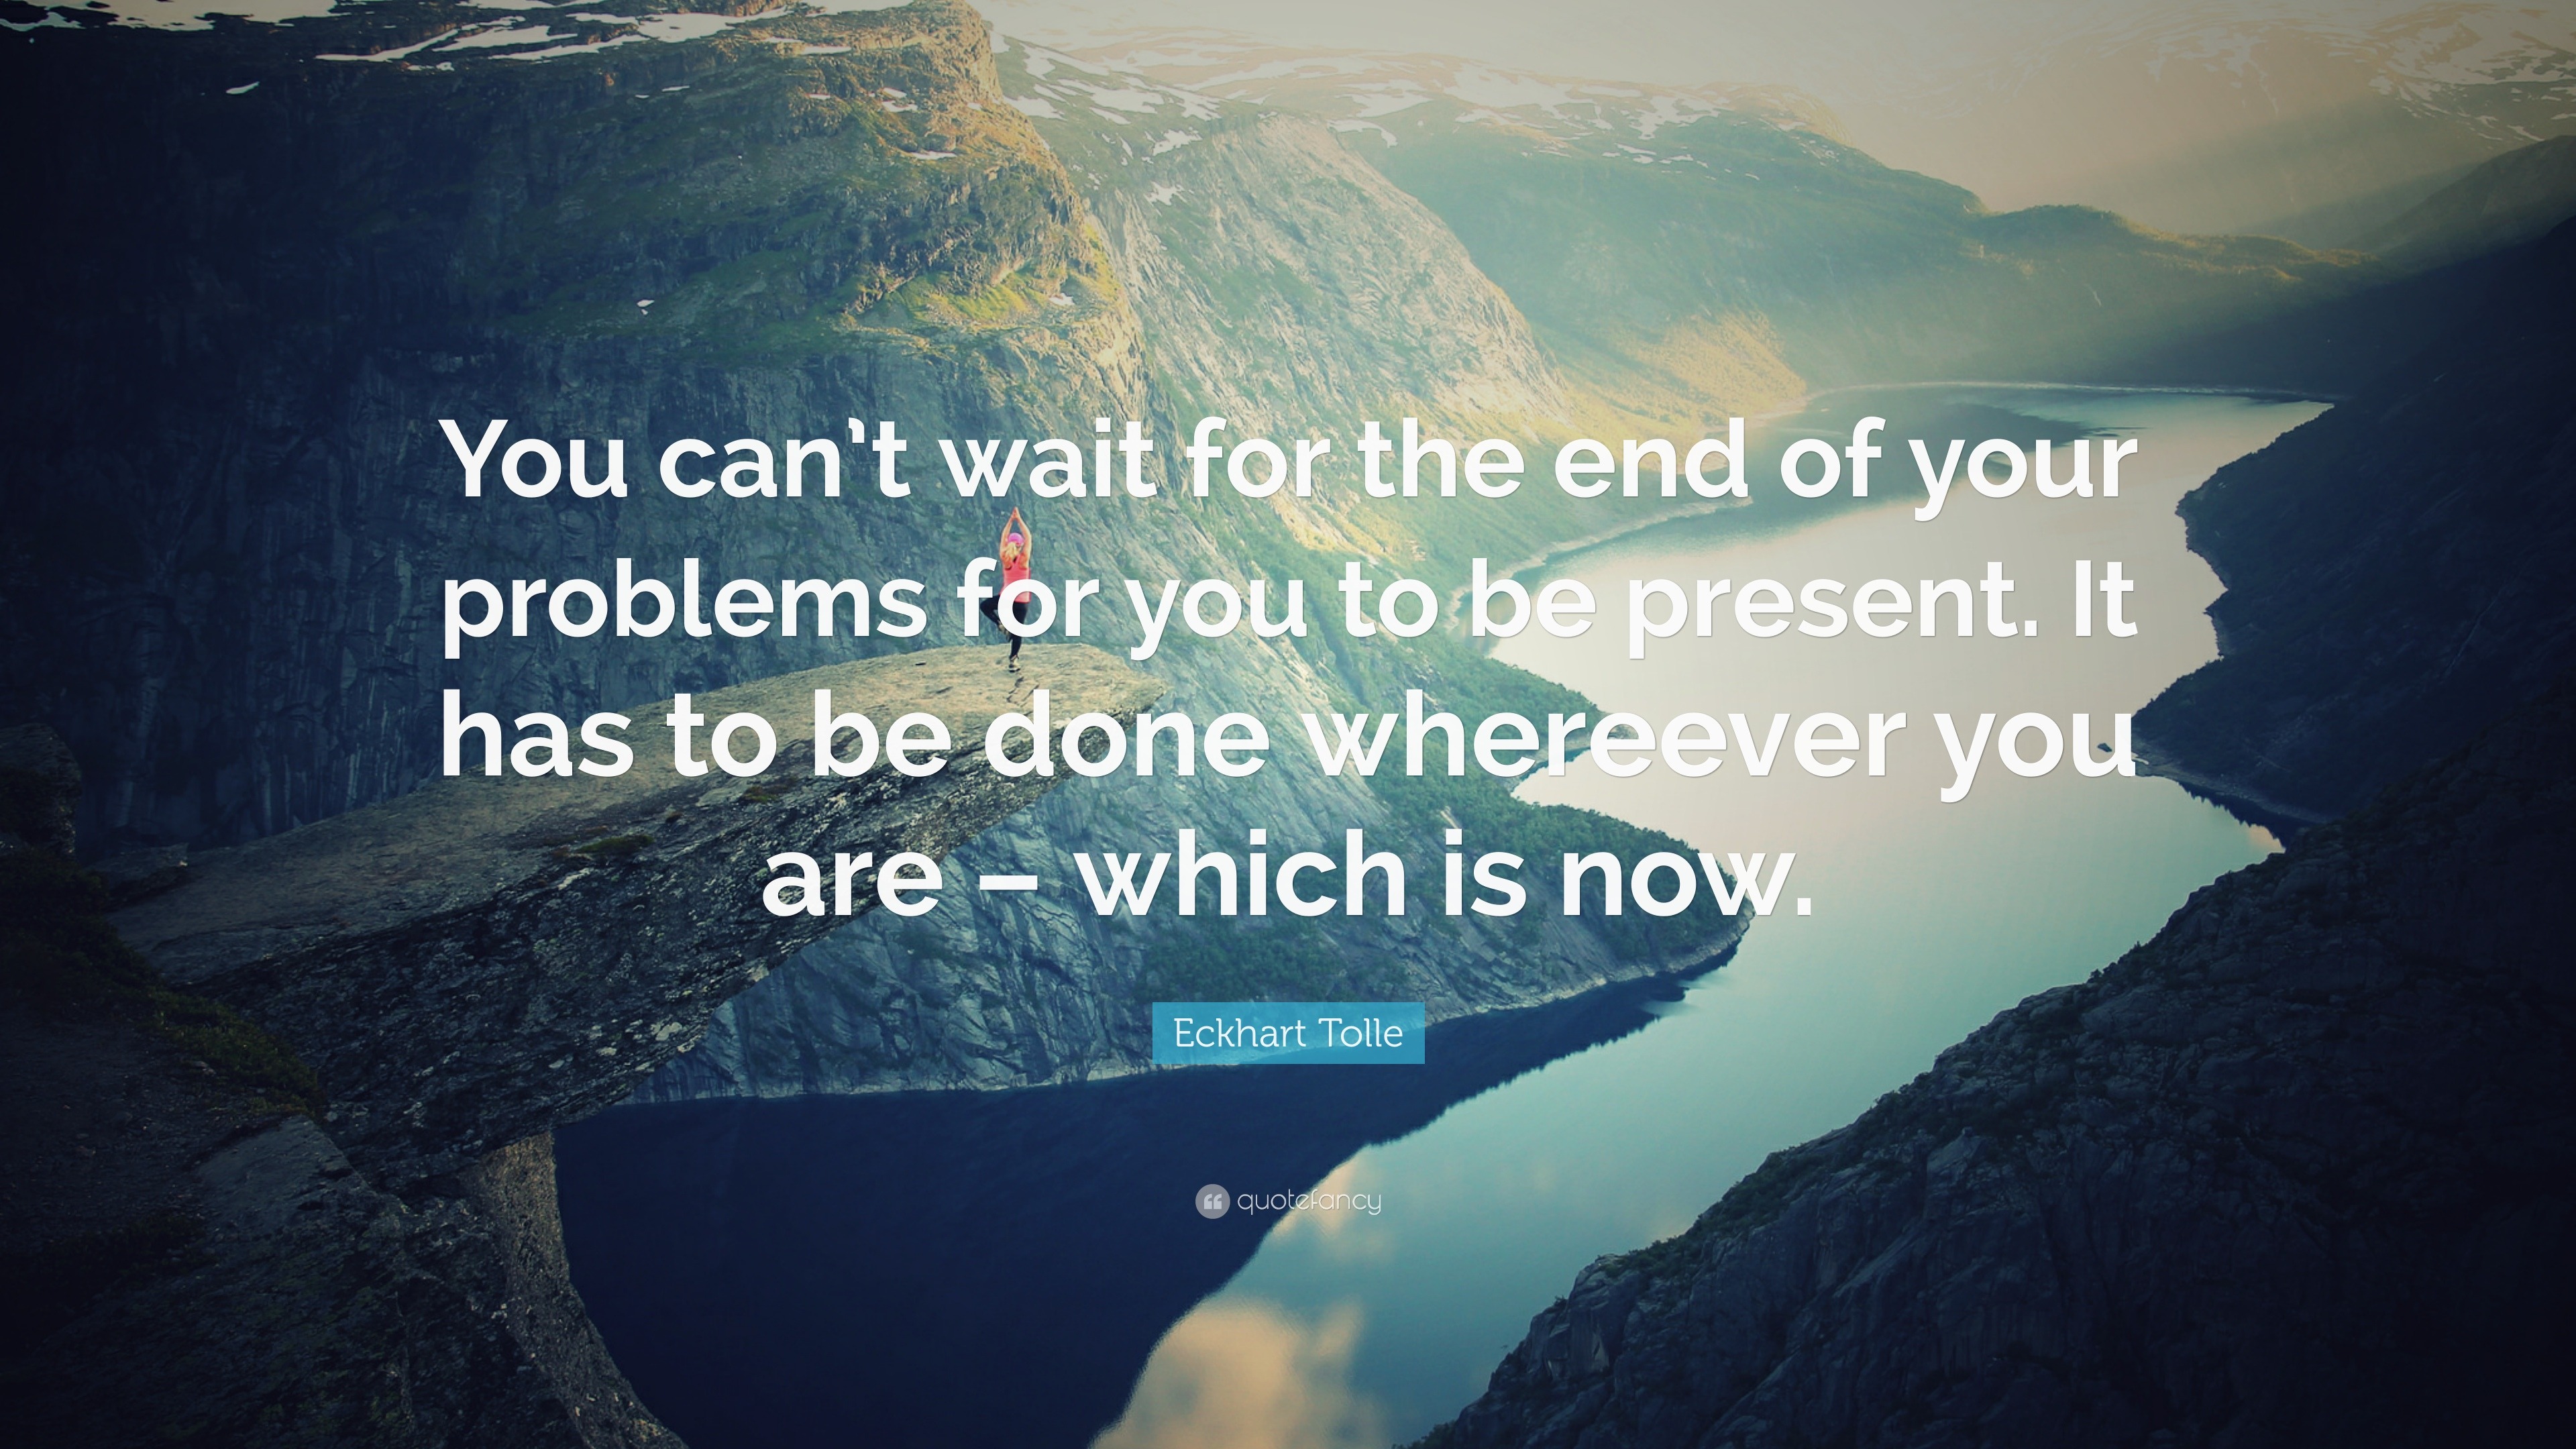 Eckhart Tolle Quote: “You can’t wait for the end of your problems for ...